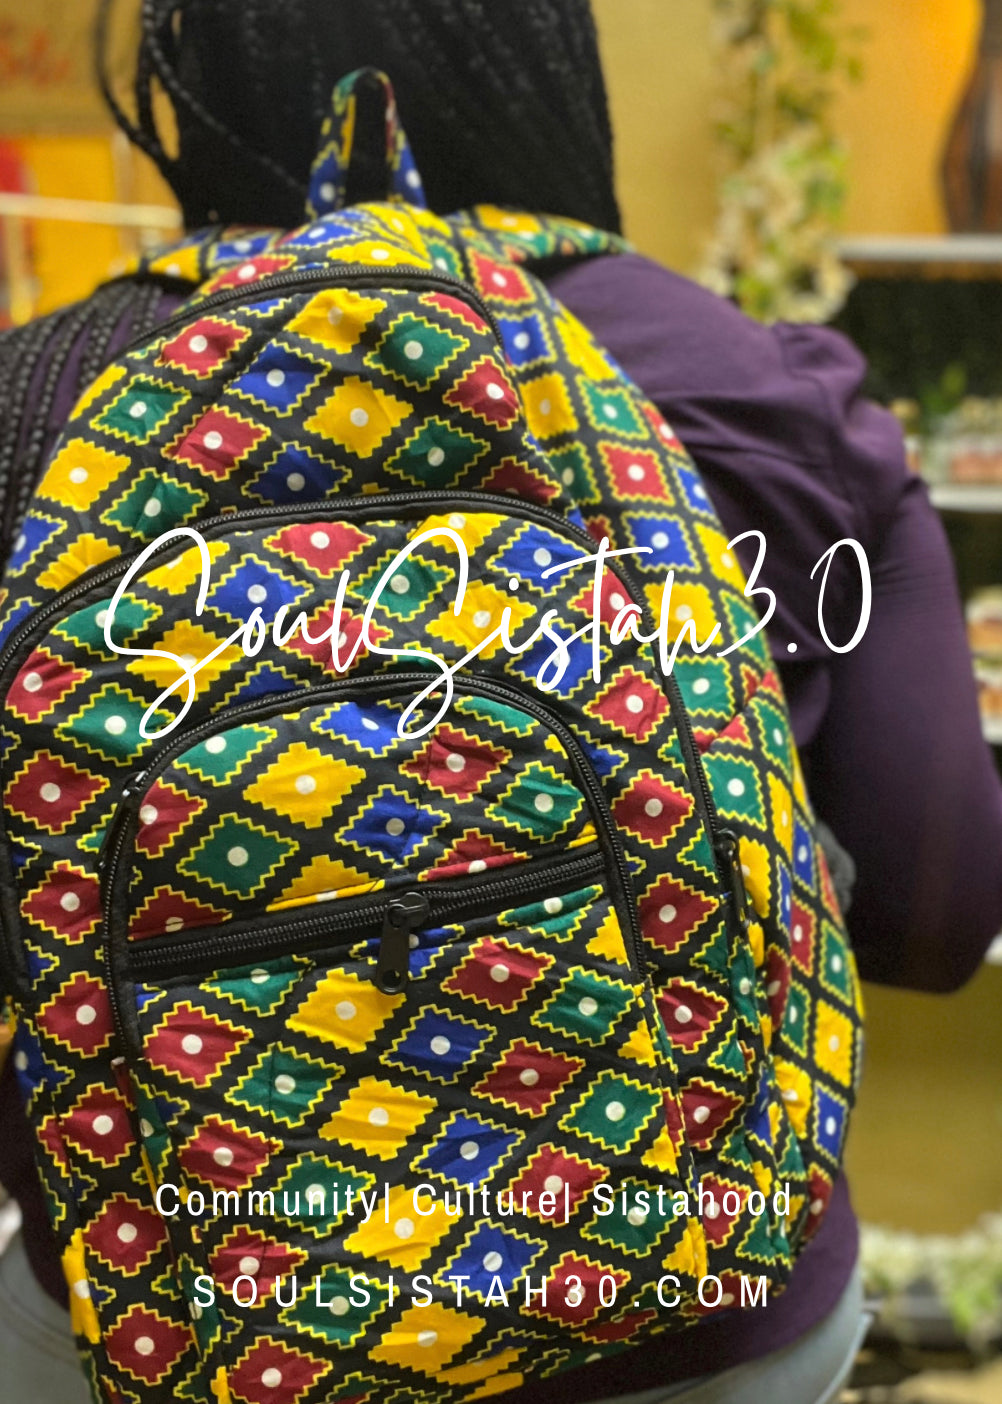 African Fabric Backpack